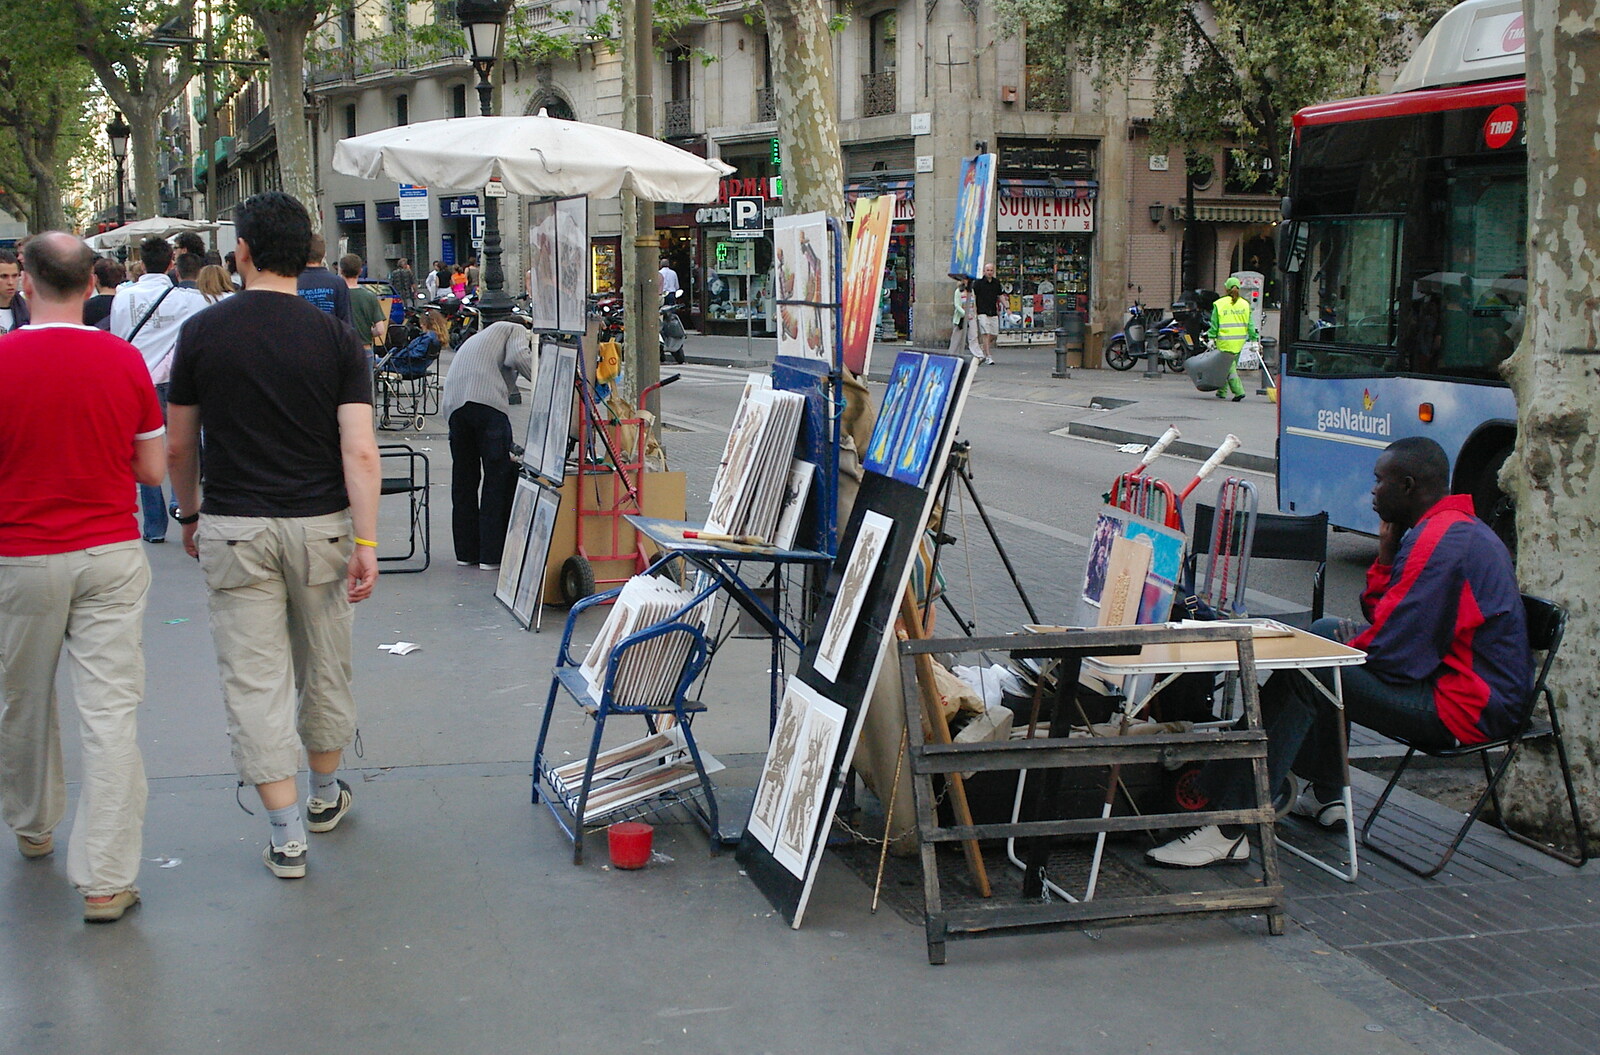 A dude waits for a painting to sell from Montjuïc and Sant Feliu de Guíxols, Barcelona, Catalunya - 30th April 2005